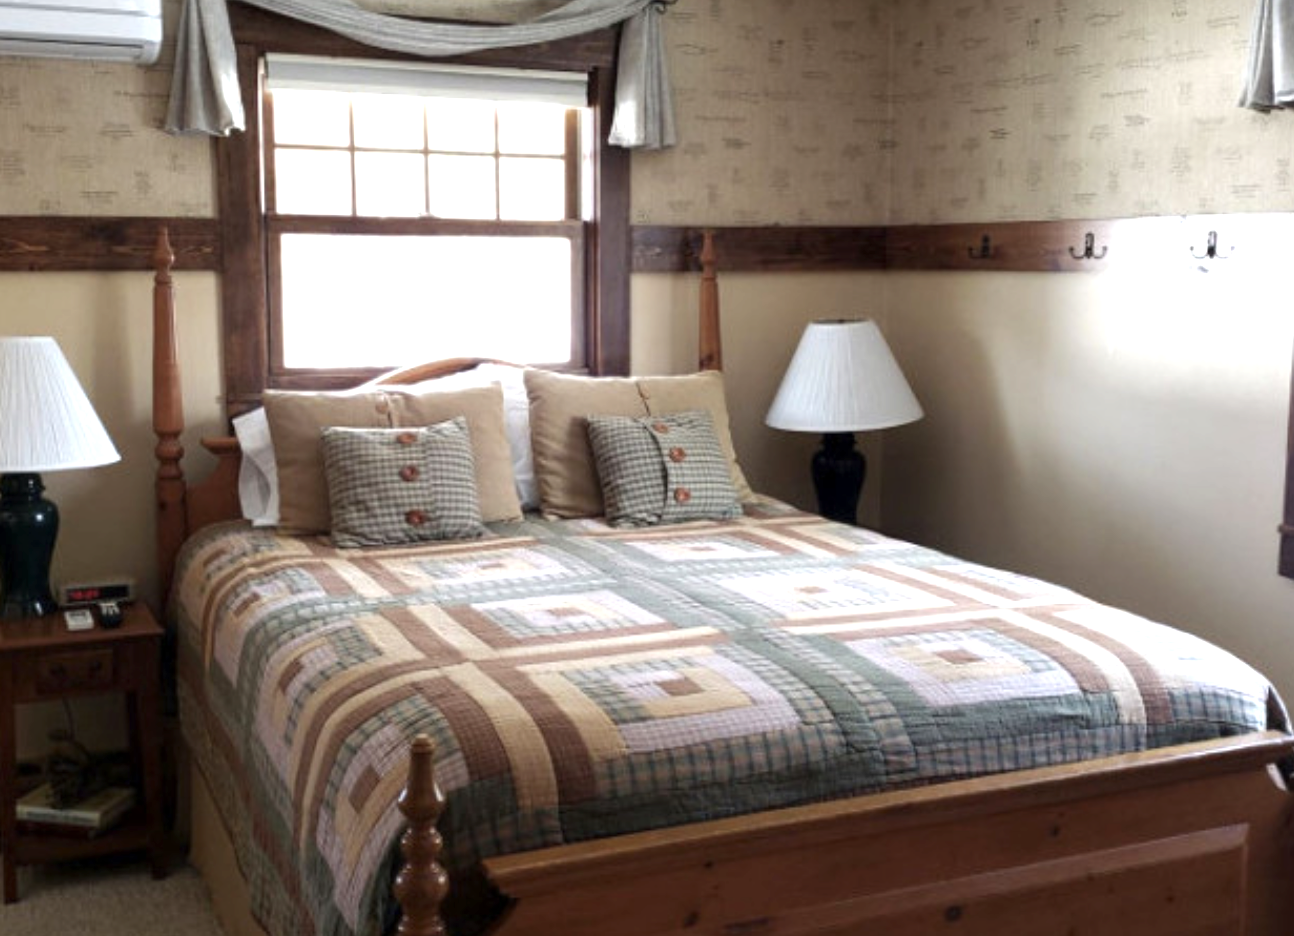 Four poster bed with a quilt spread